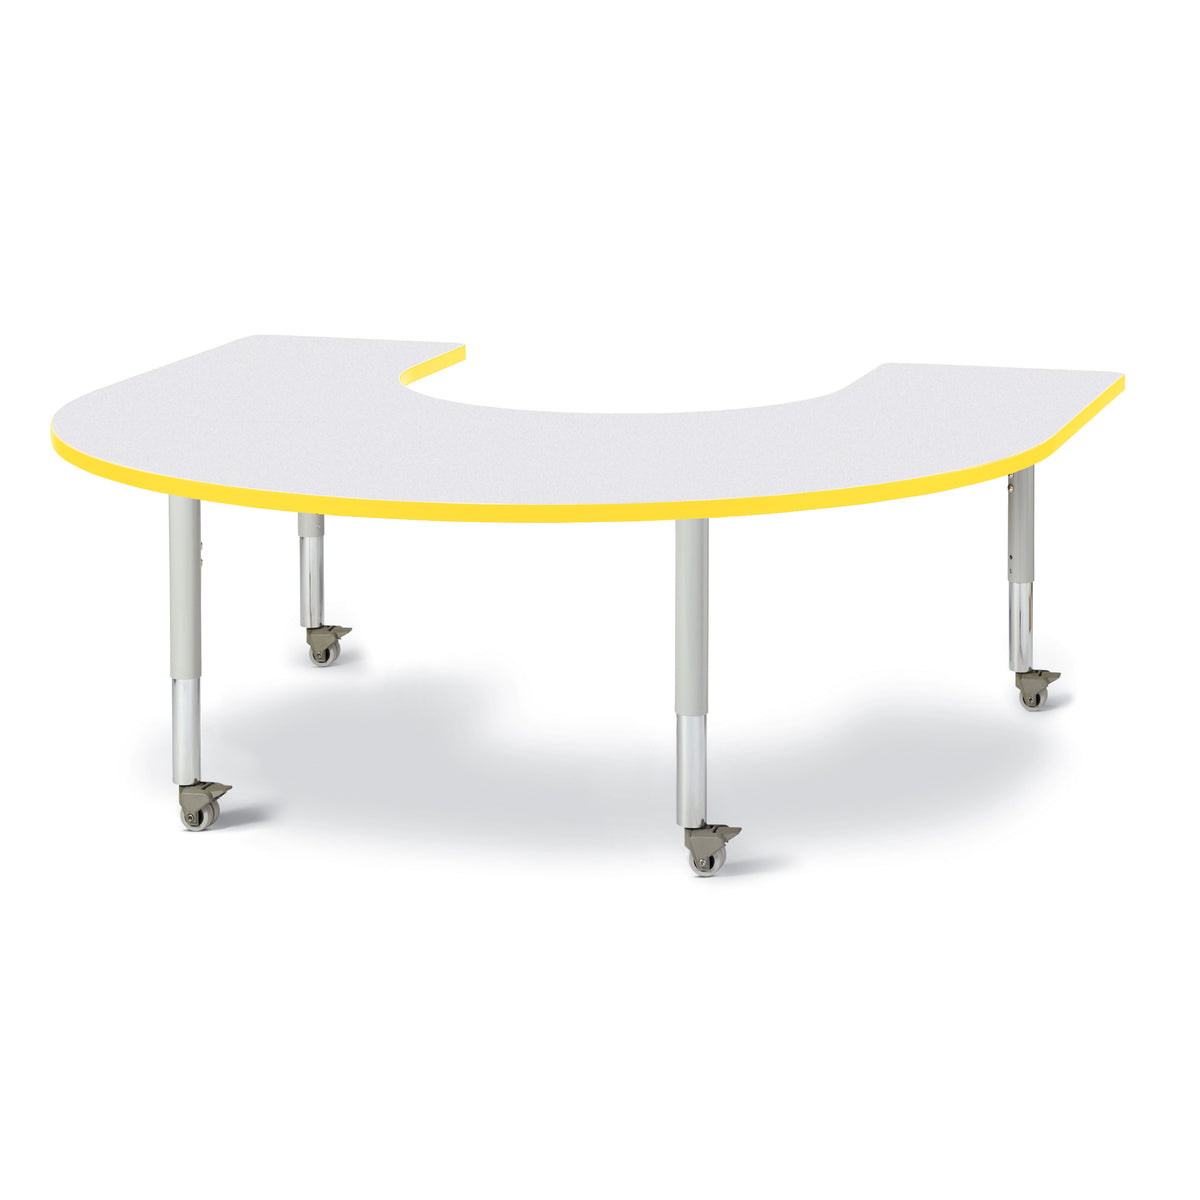 6445JCM007, Berries Horseshoe Activity Table - 66" X 60", Mobile - Freckled Gray/Yellow/Gray